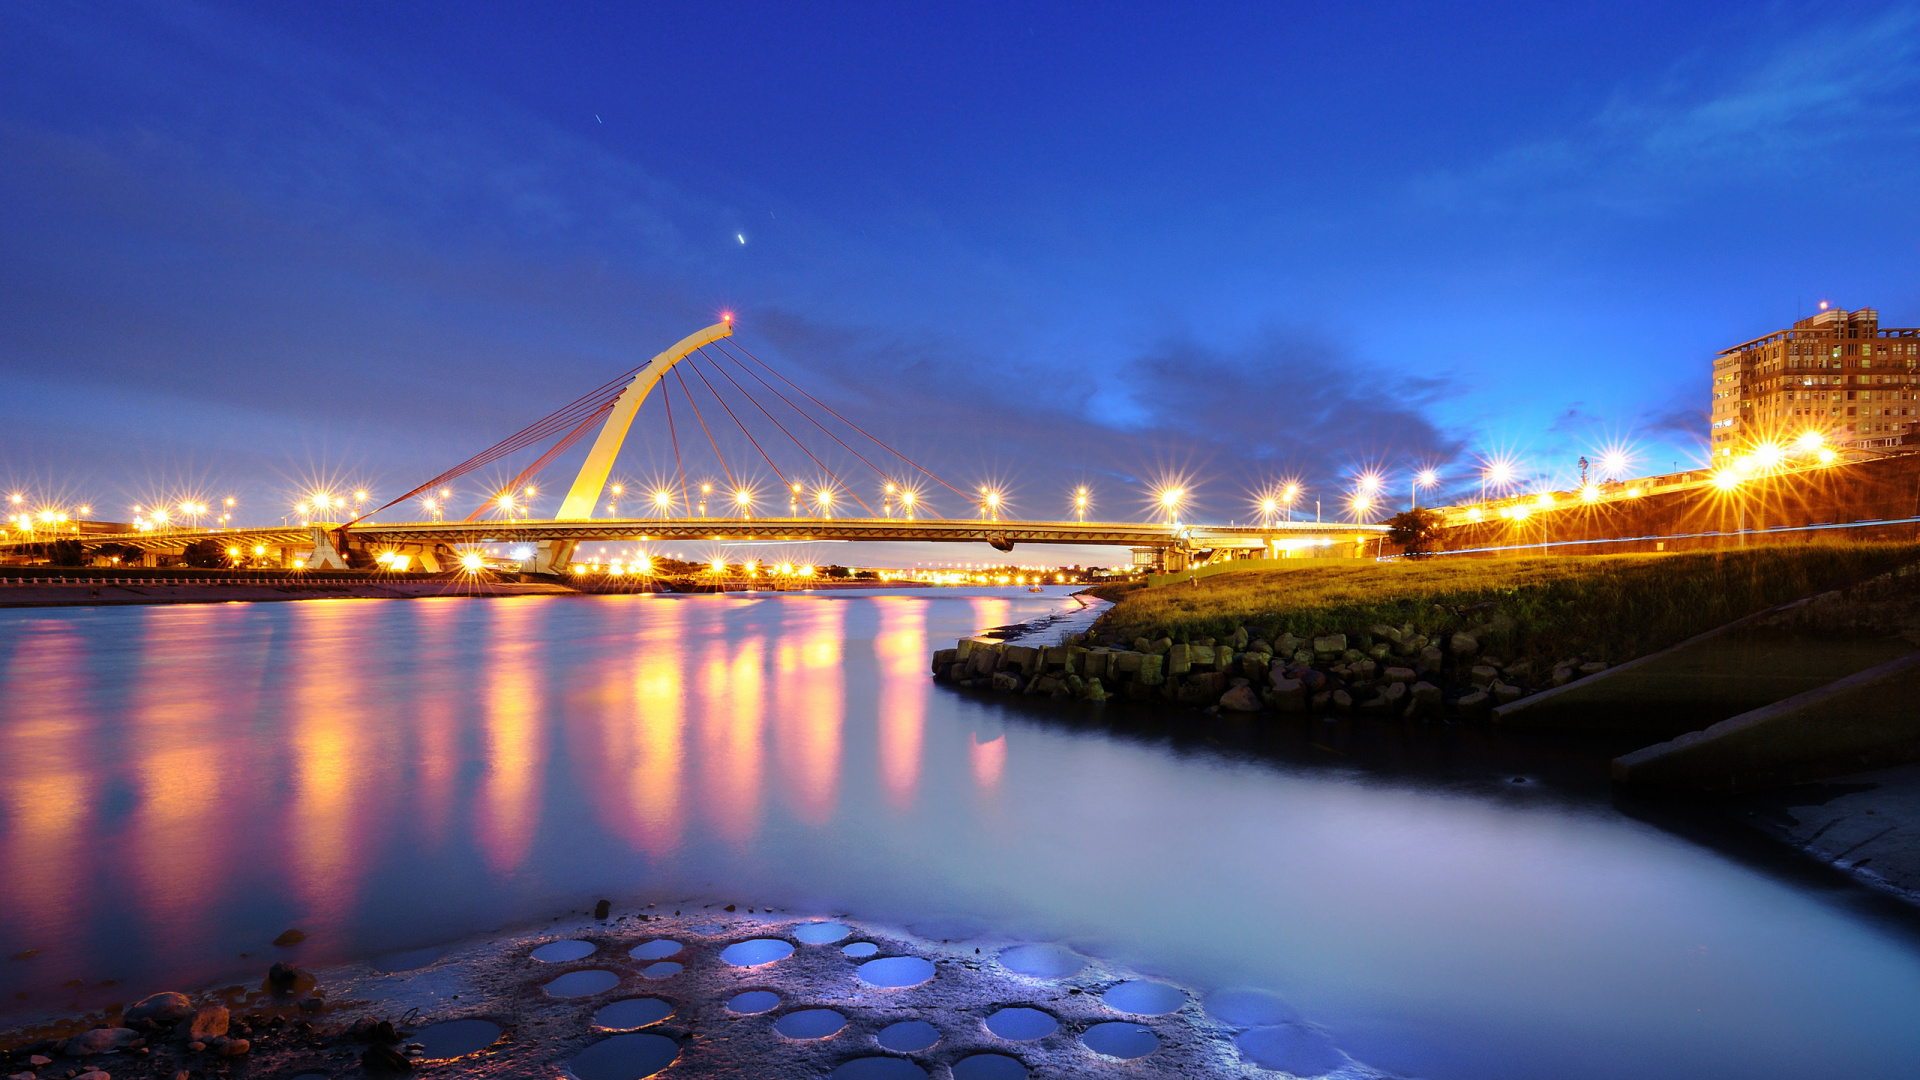 Bridge Over Water During Night Time. Wallpaper in 1920x1080 Resolution